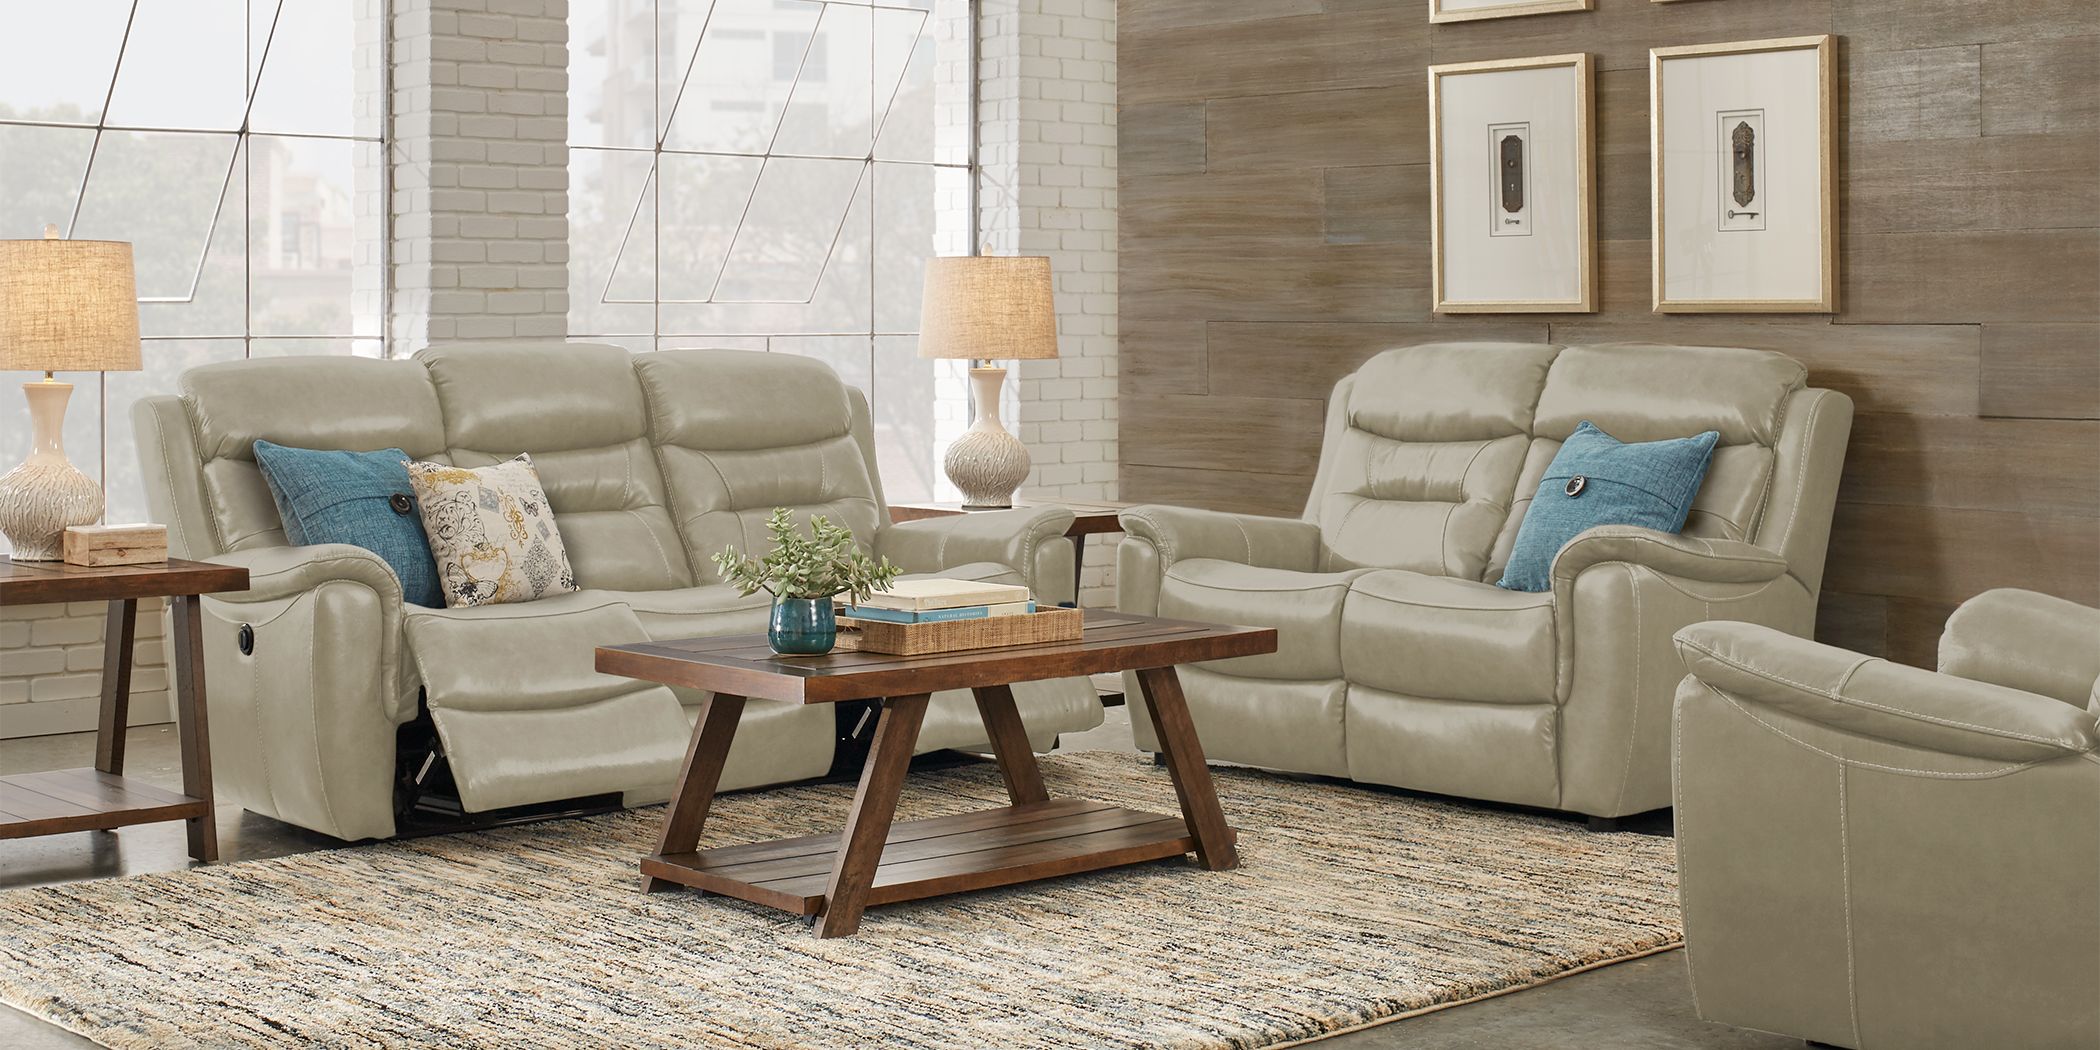 Sabella Stone Leather 3 Pc Living Room with Reclining Sofa - Rooms To Go